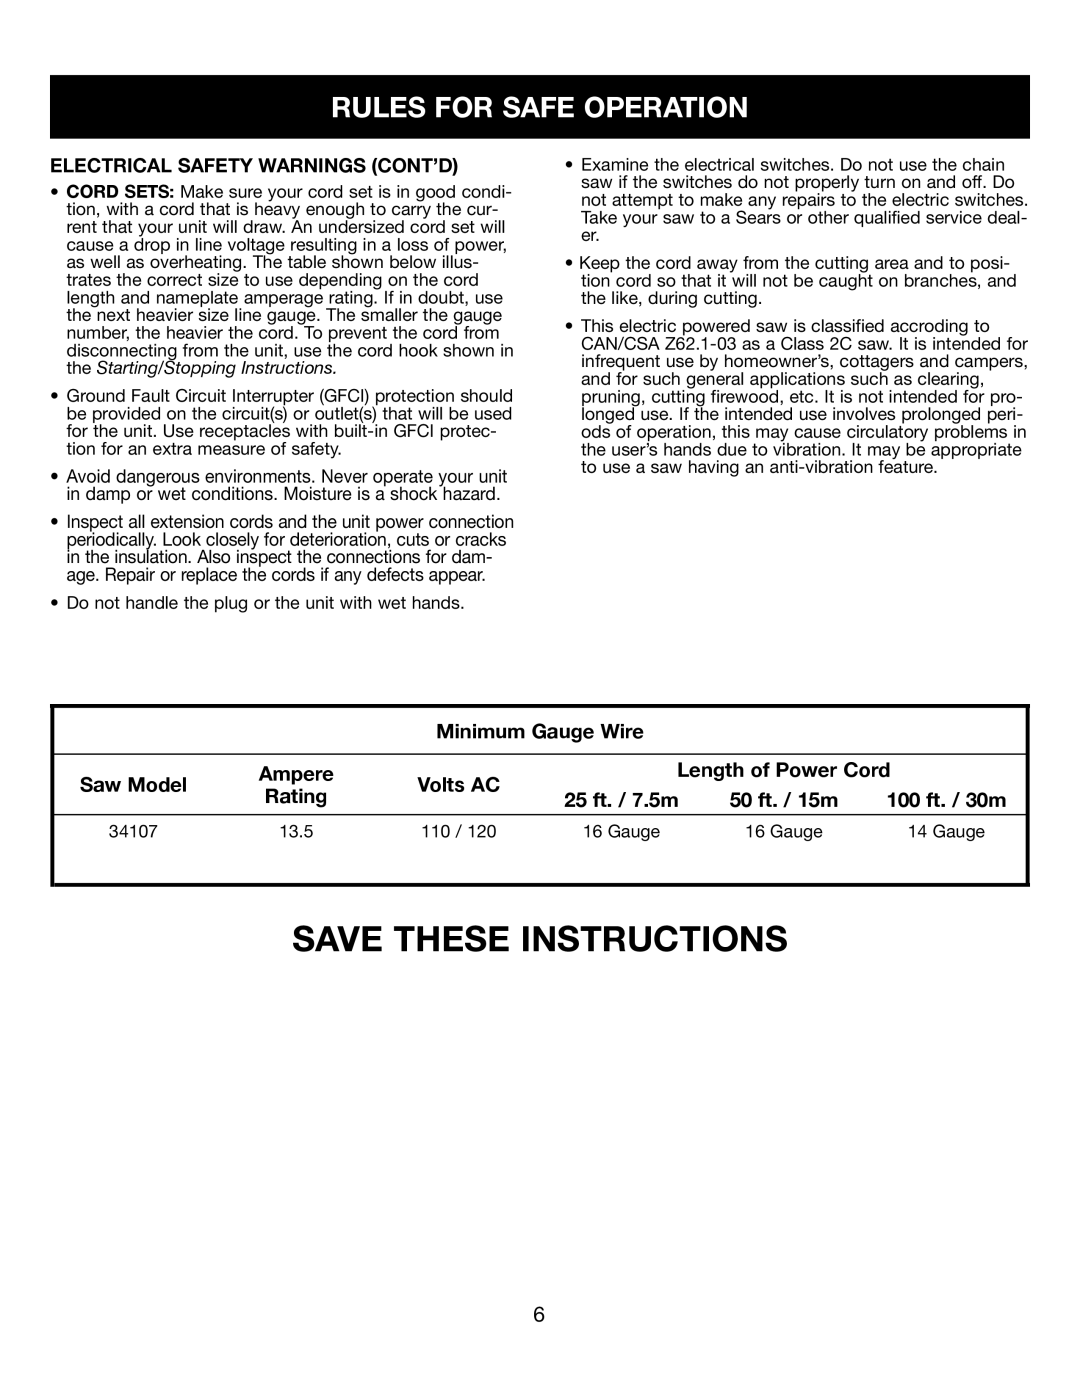 Craftsman 316.34107 manual Save These Instructions, Rules For Safe Operation 